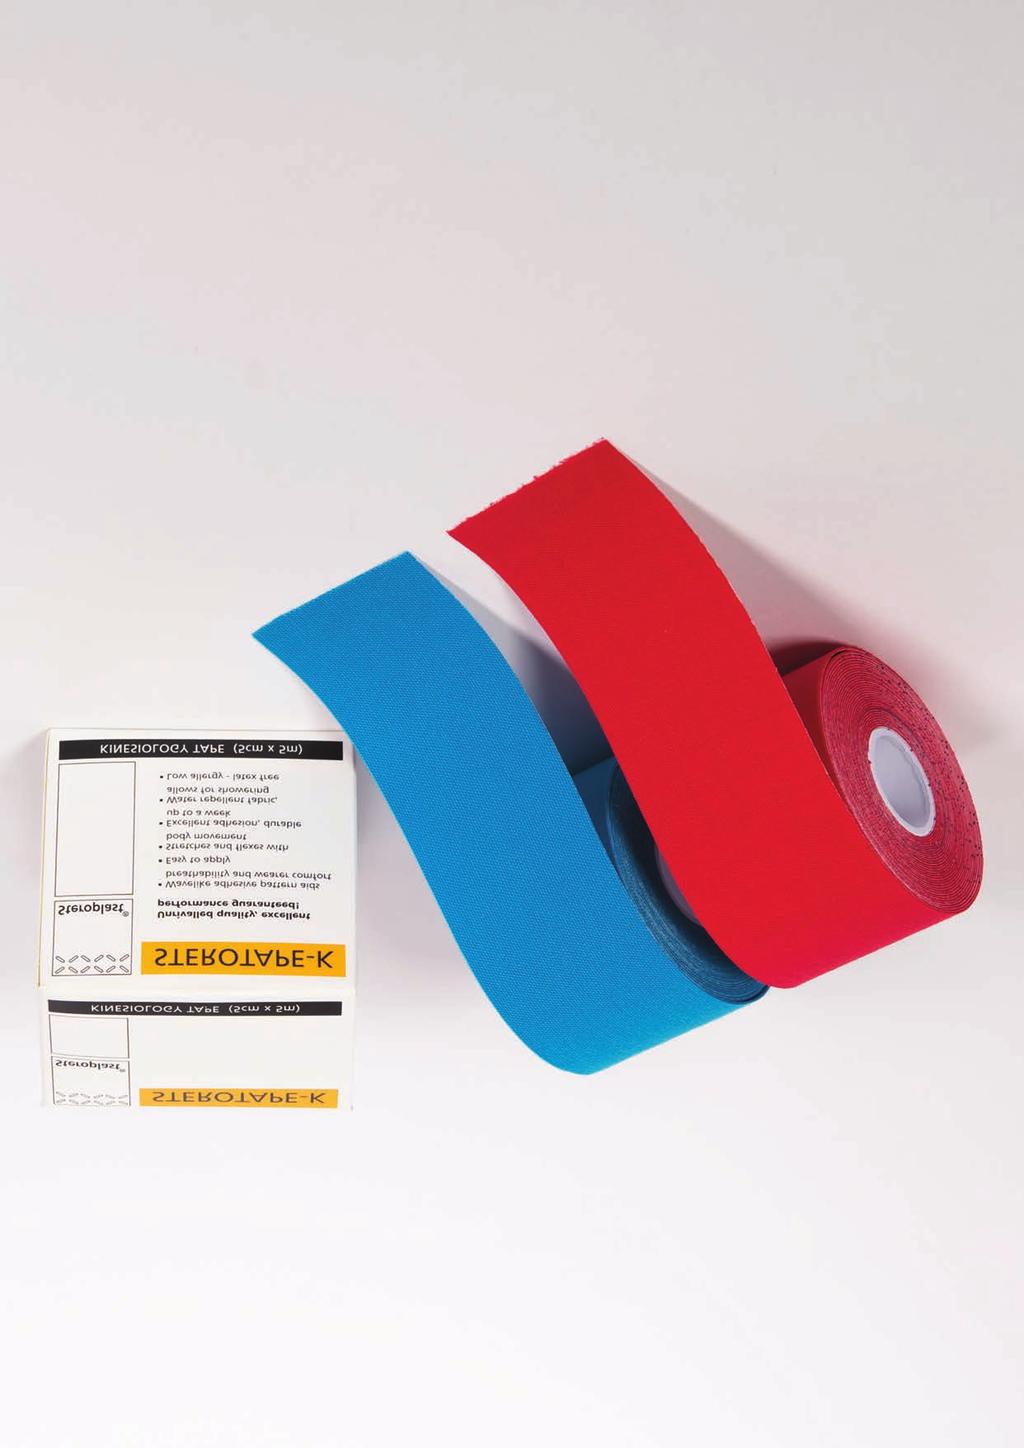 Sterotape-K Kinesiology Tape Unrivalled quality, excellent performance guaranteed!